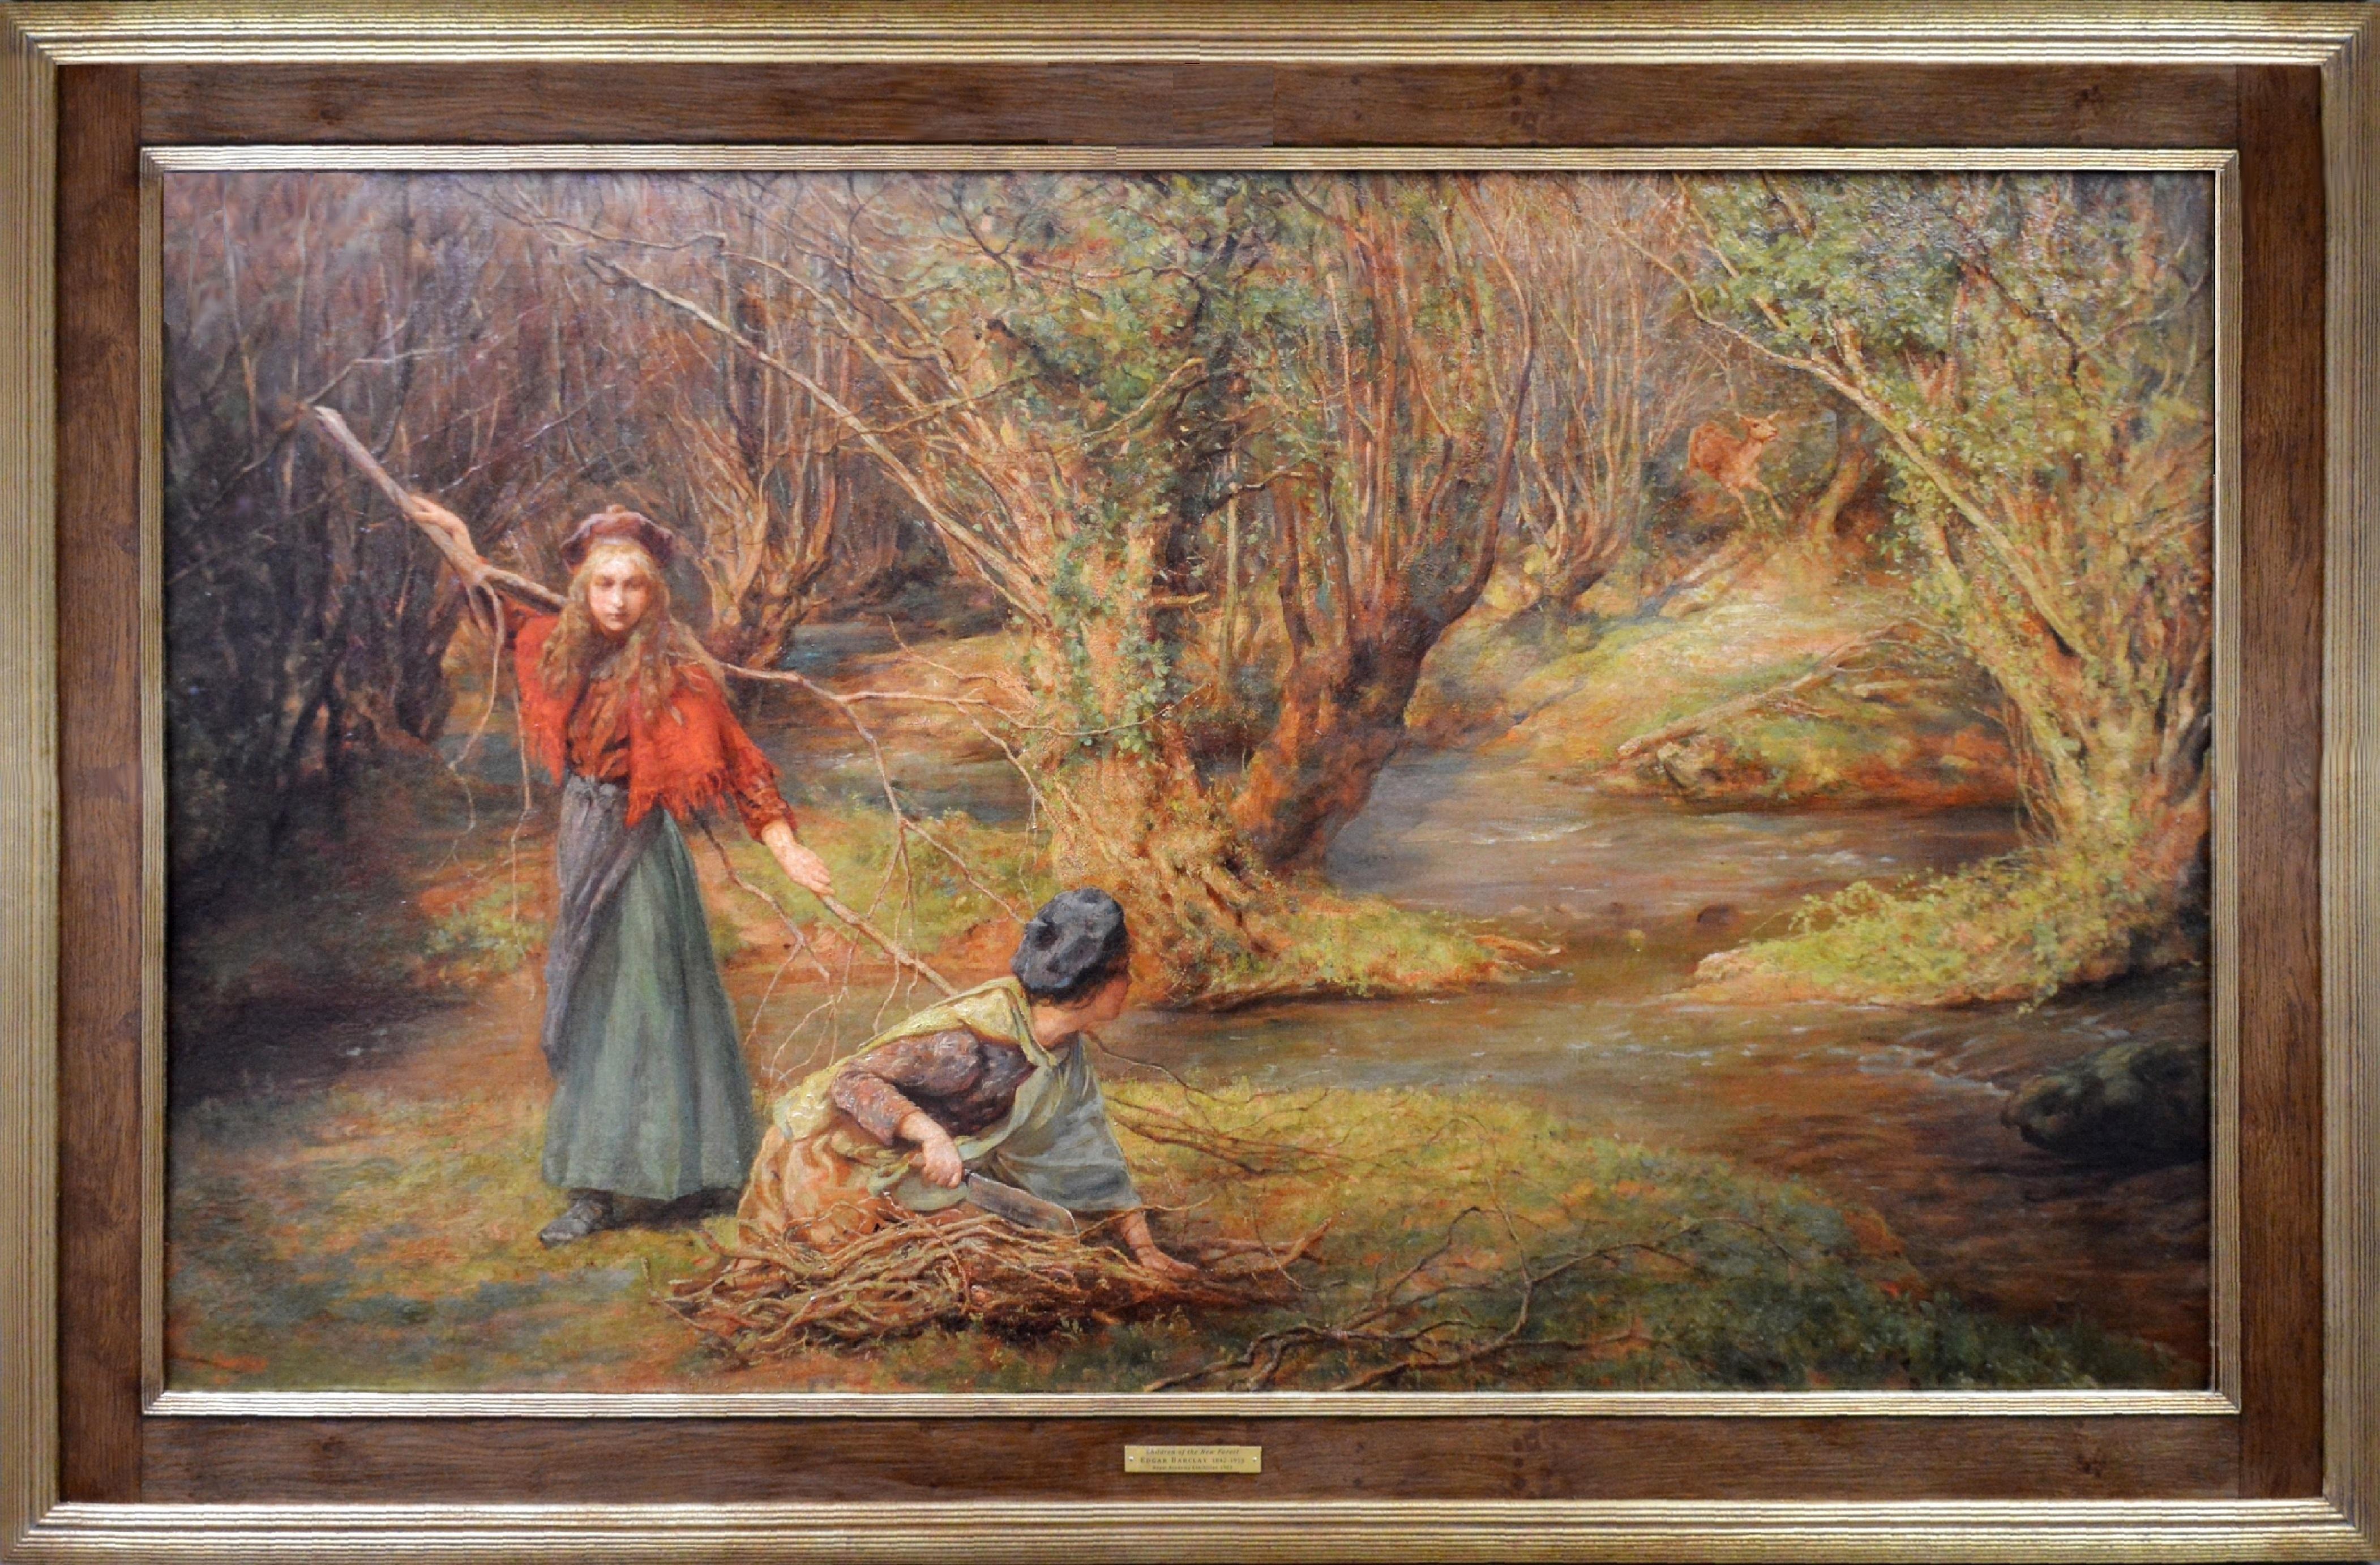 Children of the New Forest - Very Large Royal Academy Oil Painting, 1901  - Brown Figurative Painting by Edgar Barclay